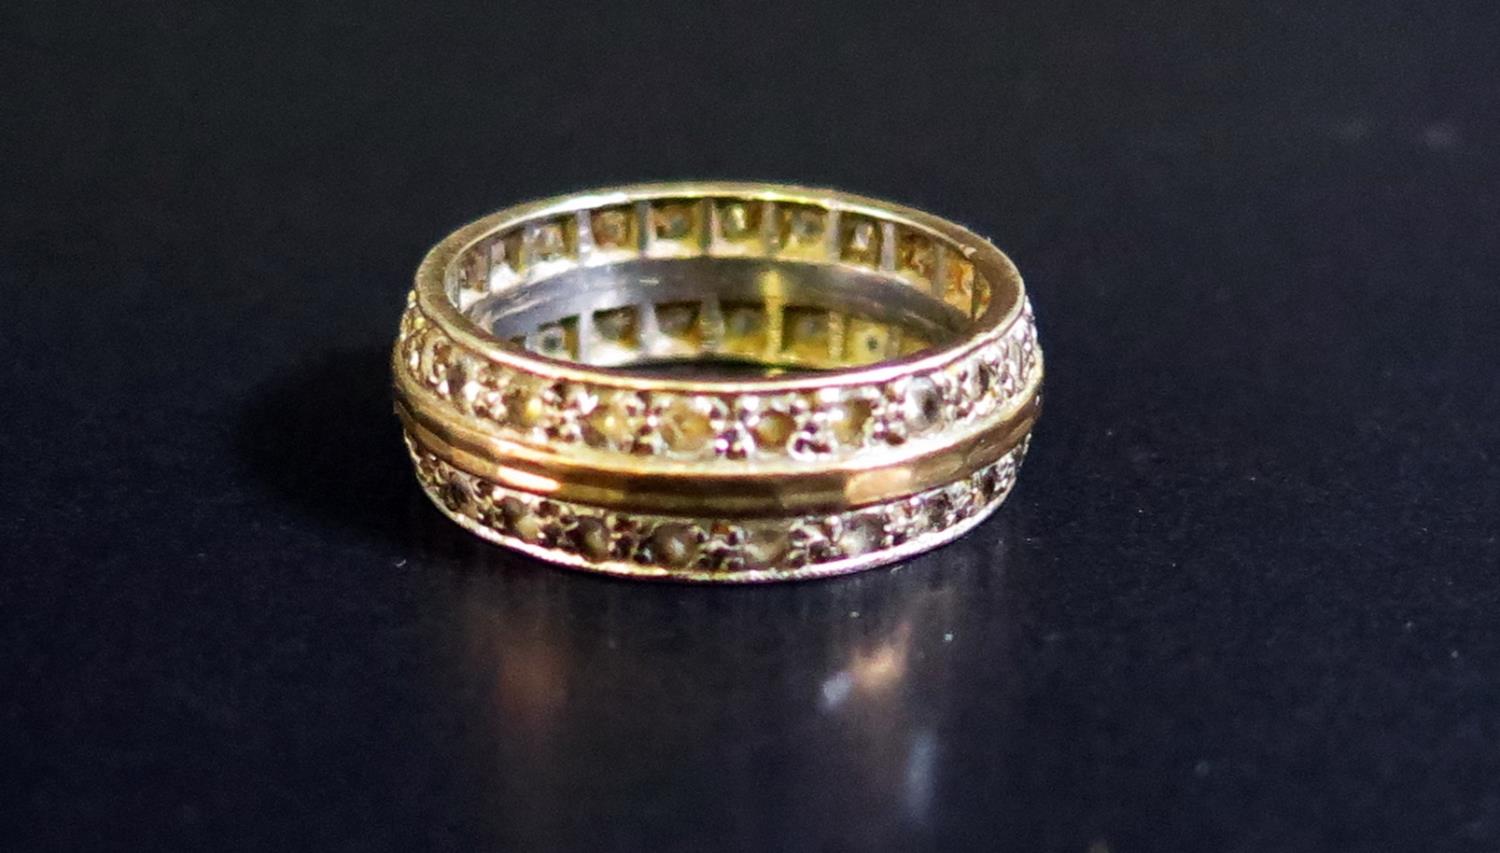 A 9ct White and Yellow Gold Diamond Twin Row Eternity Ring, size O.5, 5.5g